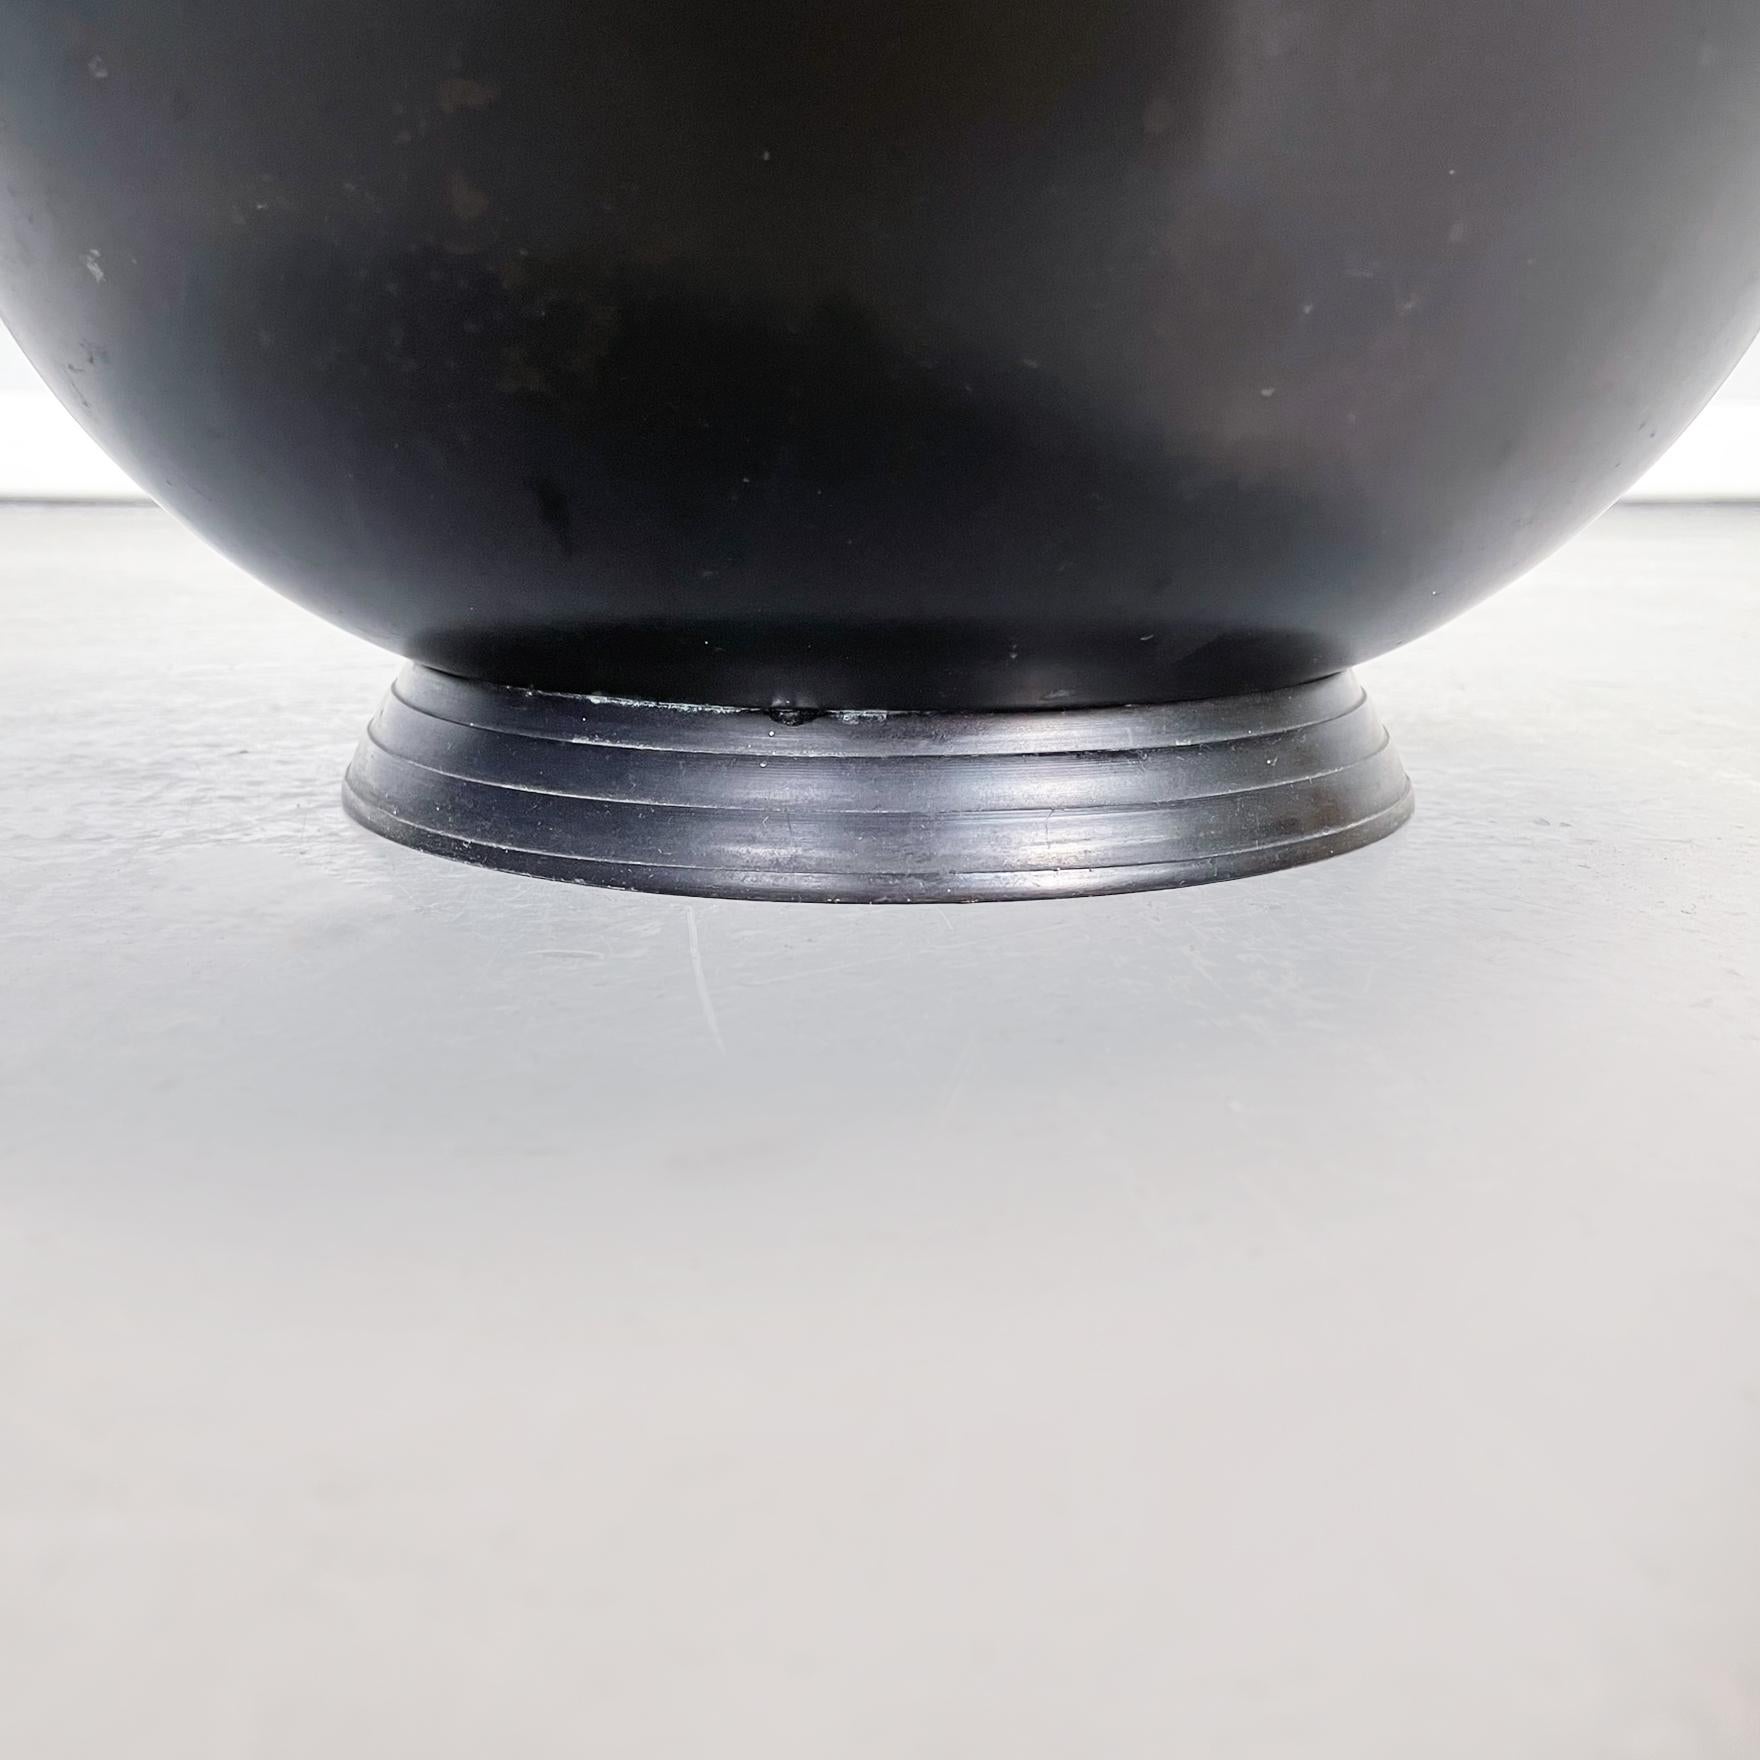 Italian Modern Round Bowl Centerpiece in Black Painted Metal, 1990s For Sale 4